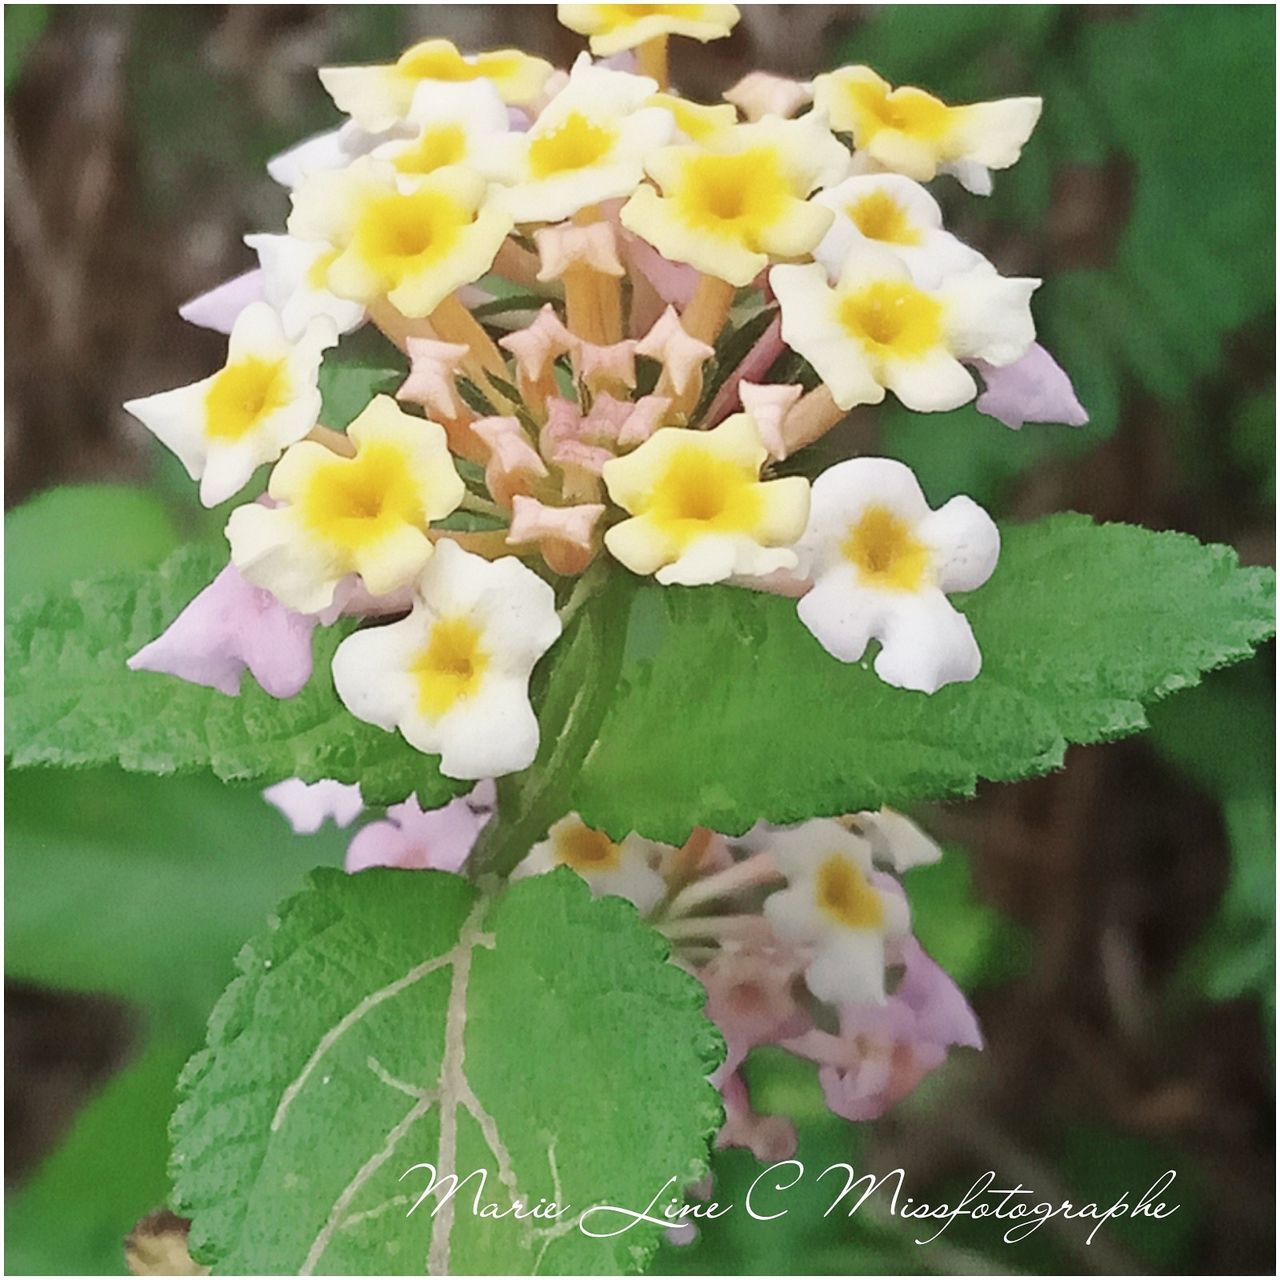 flower, flowering plant, plant, beauty in nature, vulnerability, fragility, freshness, petal, growth, flower head, inflorescence, close-up, nature, focus on foreground, day, plant part, leaf, outdoors, park, yellow, no people, lantana, bunch of flowers